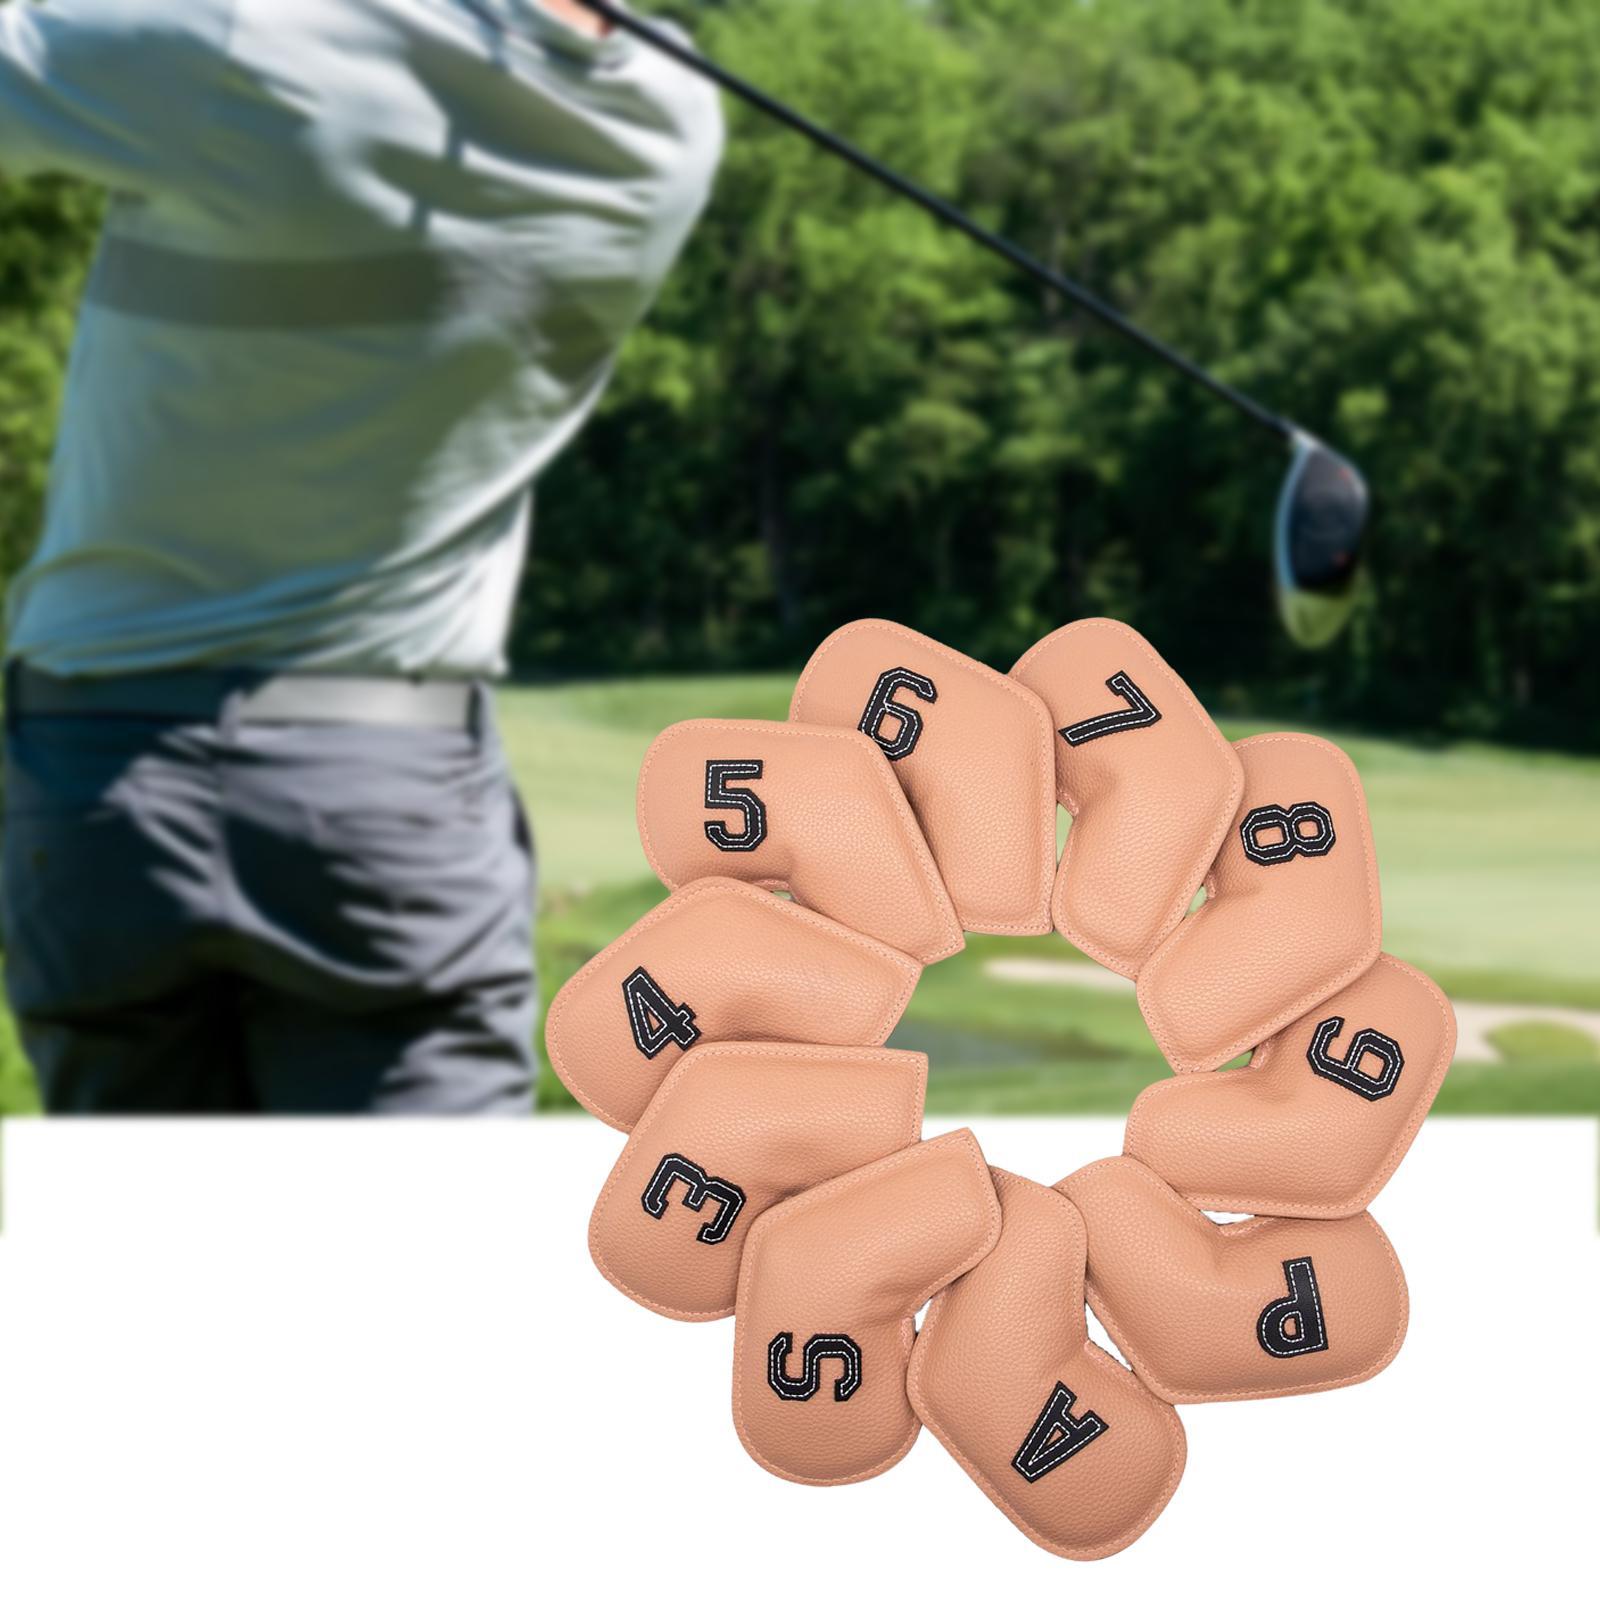 10Pcs Golf Iron Headcover Set 3,4,5,6,7,8,9,A,S,P Club Embroidery Number for All Brands